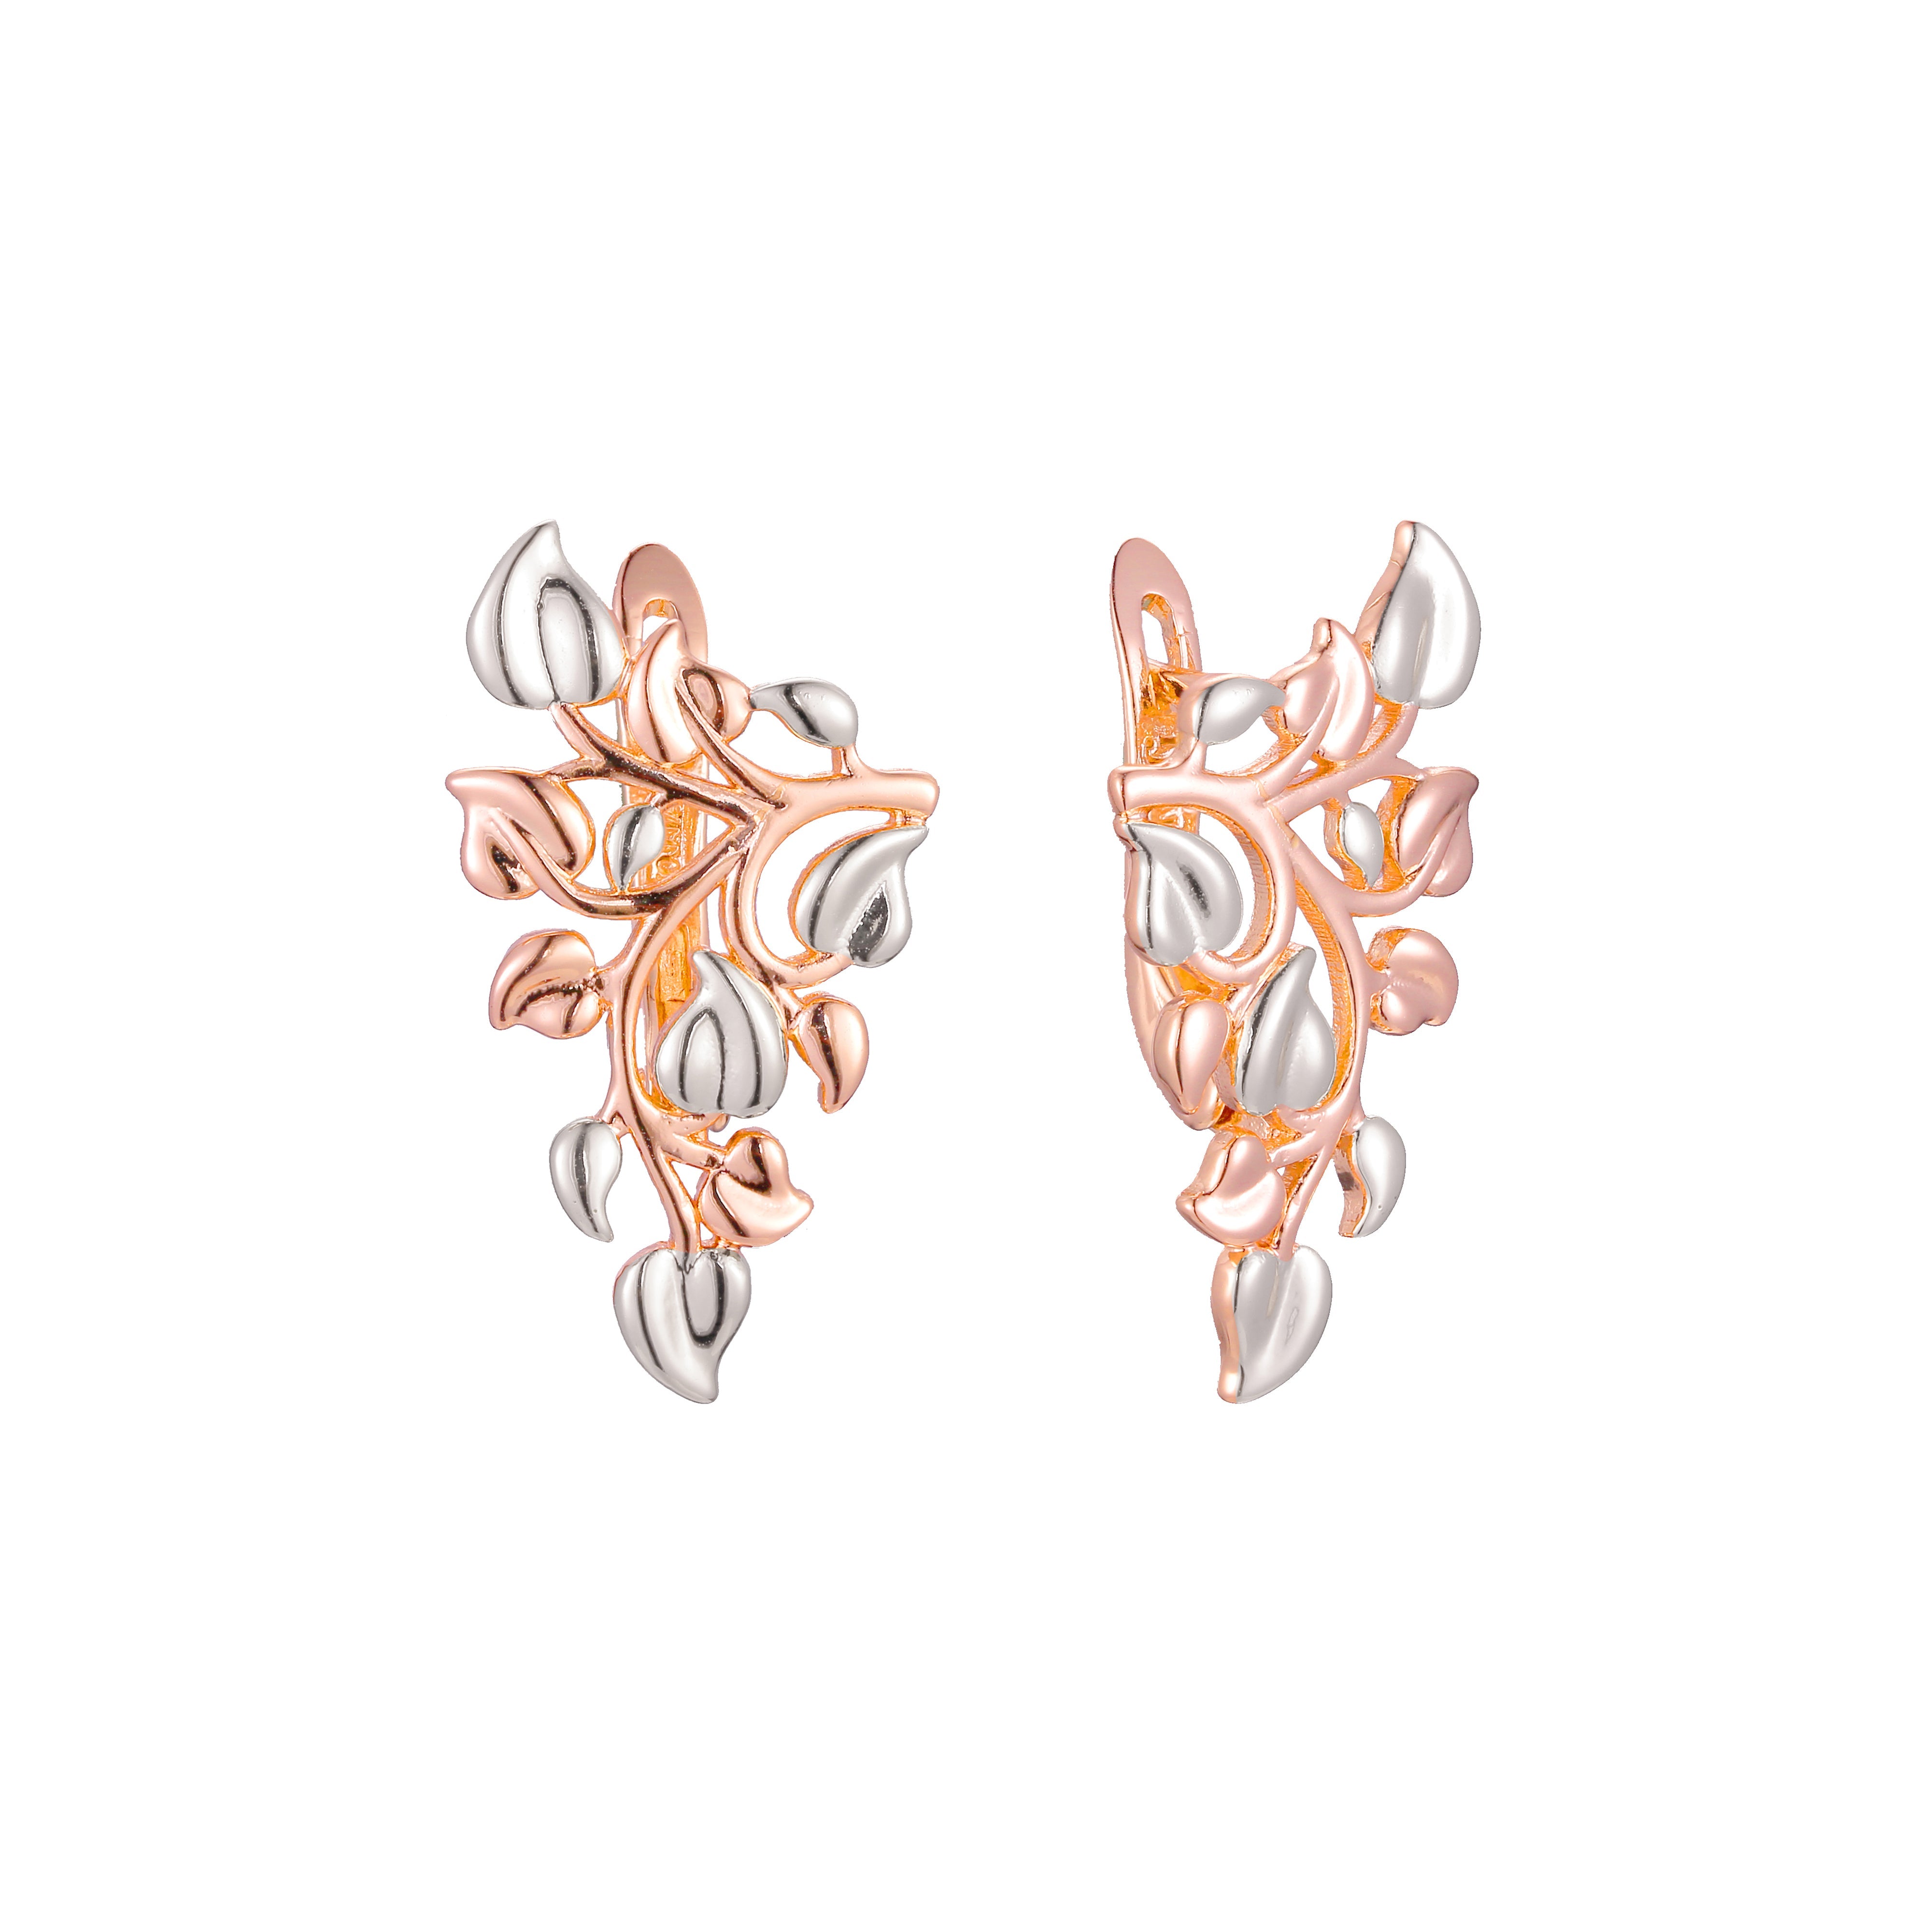 Thousand leaves earrings in 14K Gold, Rose Gold, Rose Gold two tone plating colors